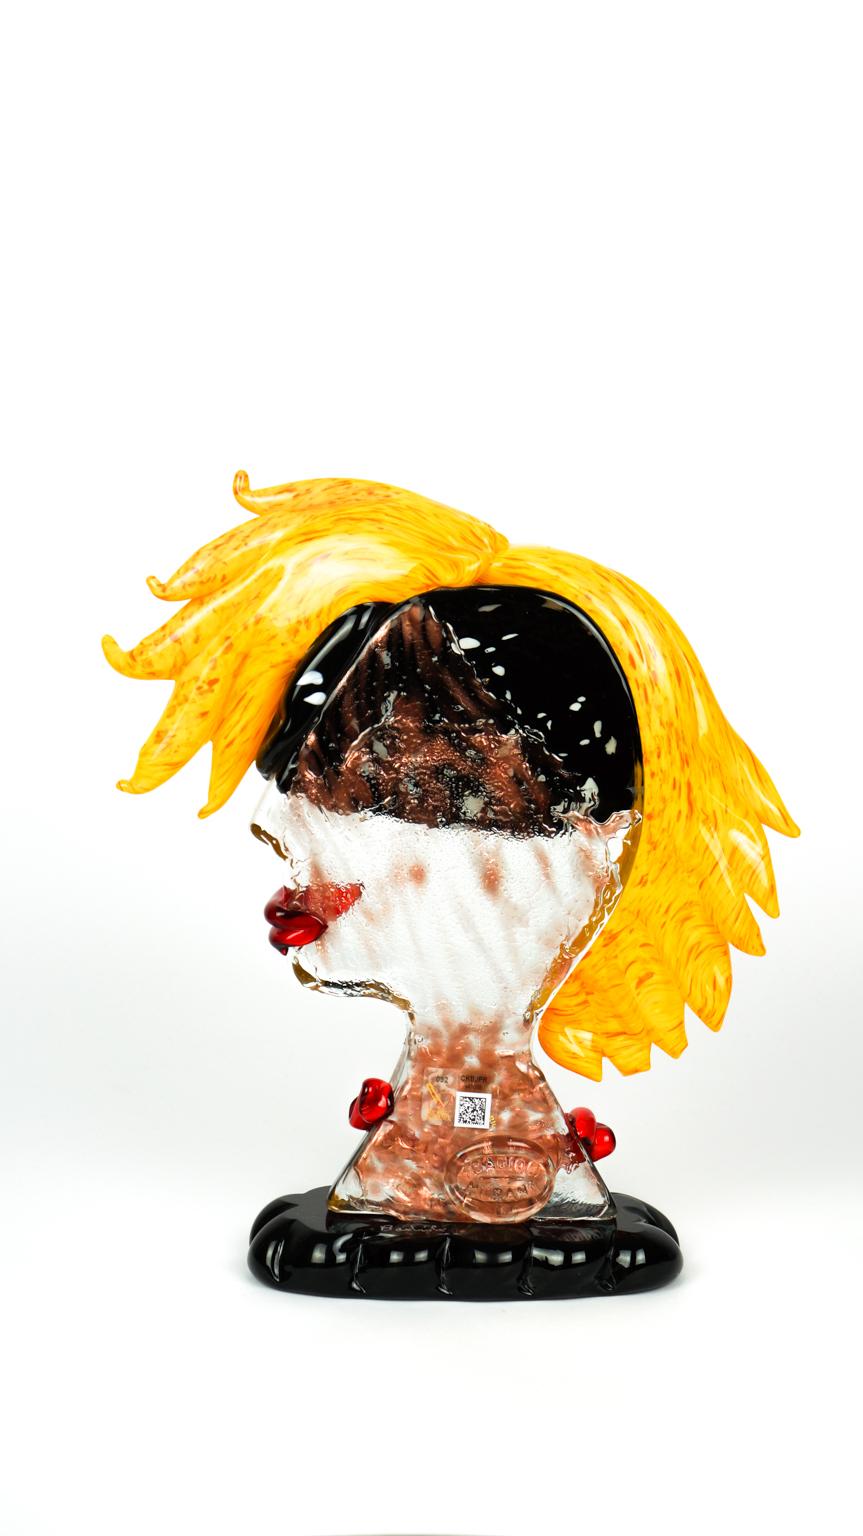 Contemporary Abstract Sculpture Tribute to Picasso Head Carnival Murano Glass by Badioli For Sale